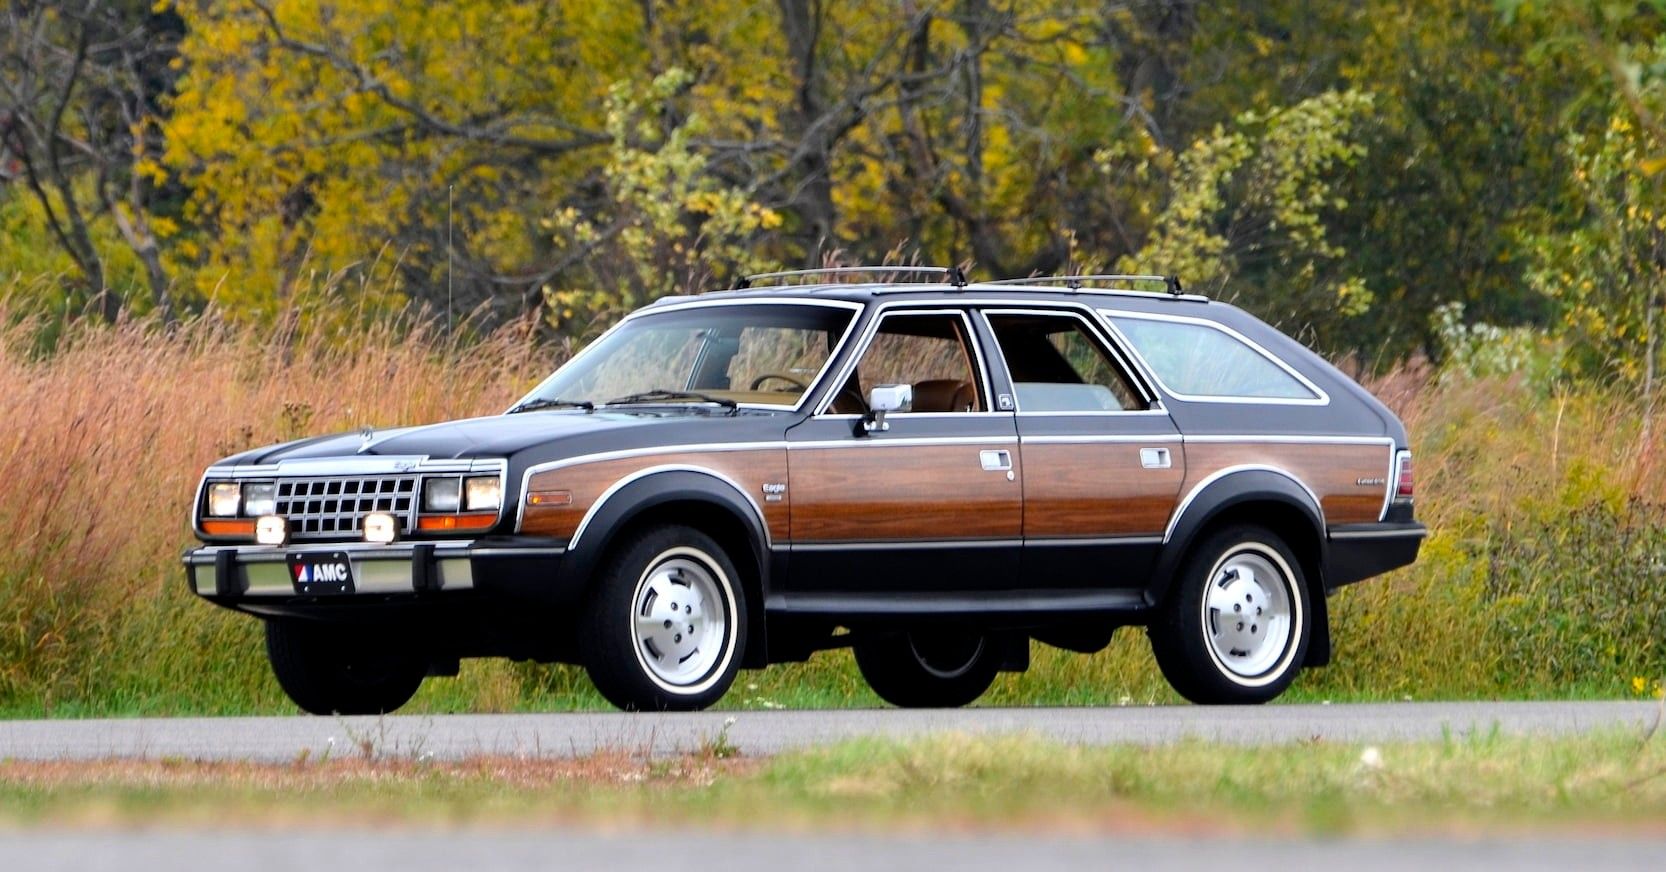 Here's Why The AMC Eagle Wagon Never Caught On | HotCars